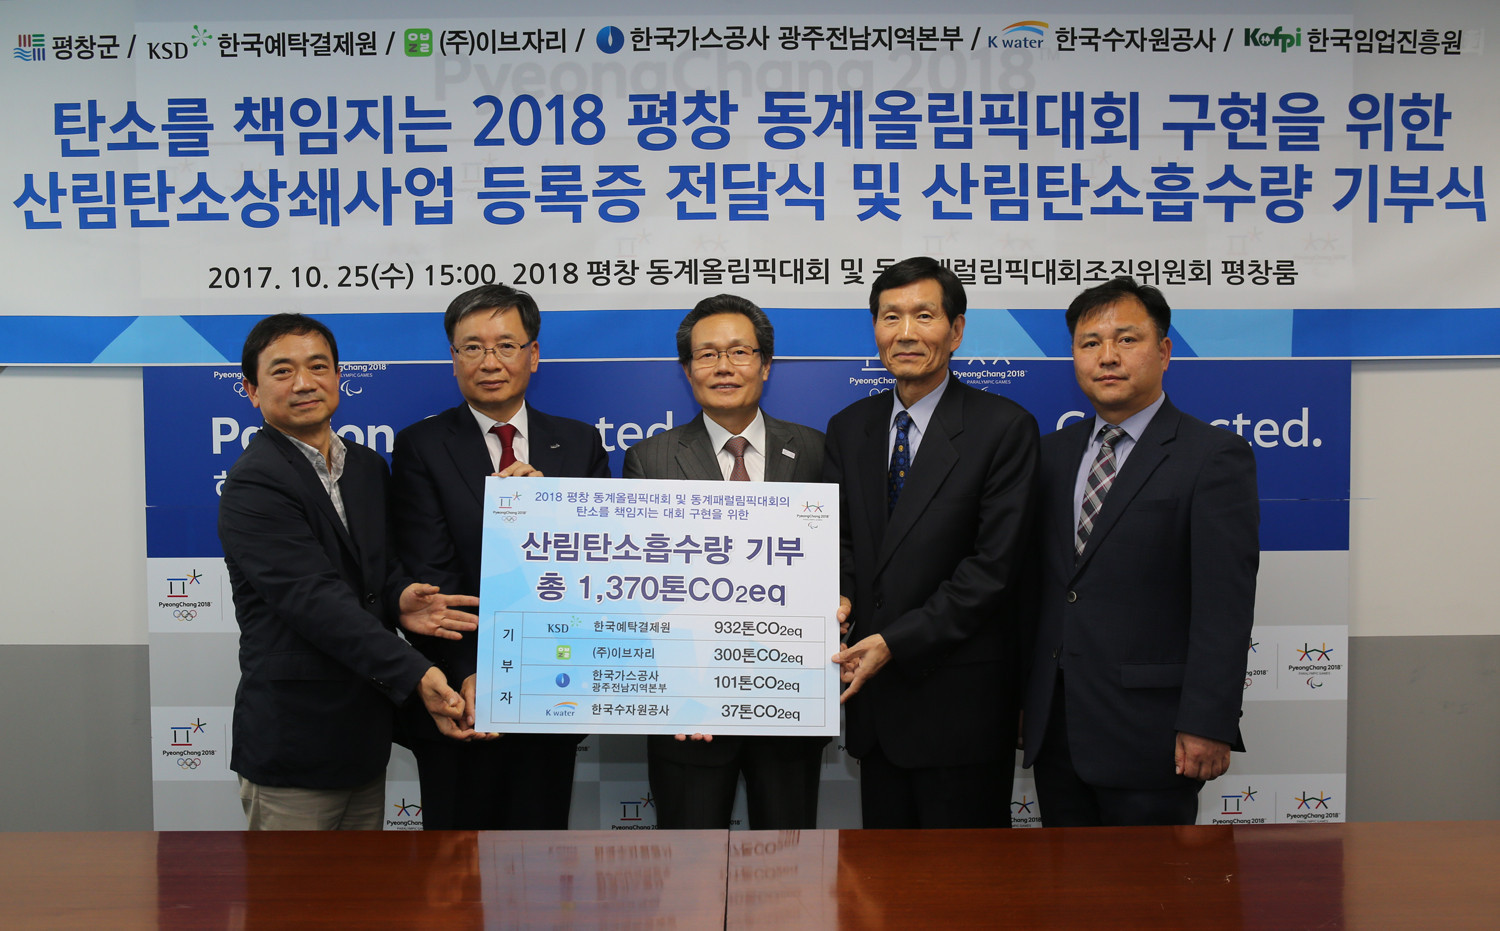 In all, 1,370 tonnes of forest carbon absorption were donated to the Pyeongchang 2018 Organising Committee by the Korea Forest Service to cut greenhouse gas emissions ©Pyeongchang 2018